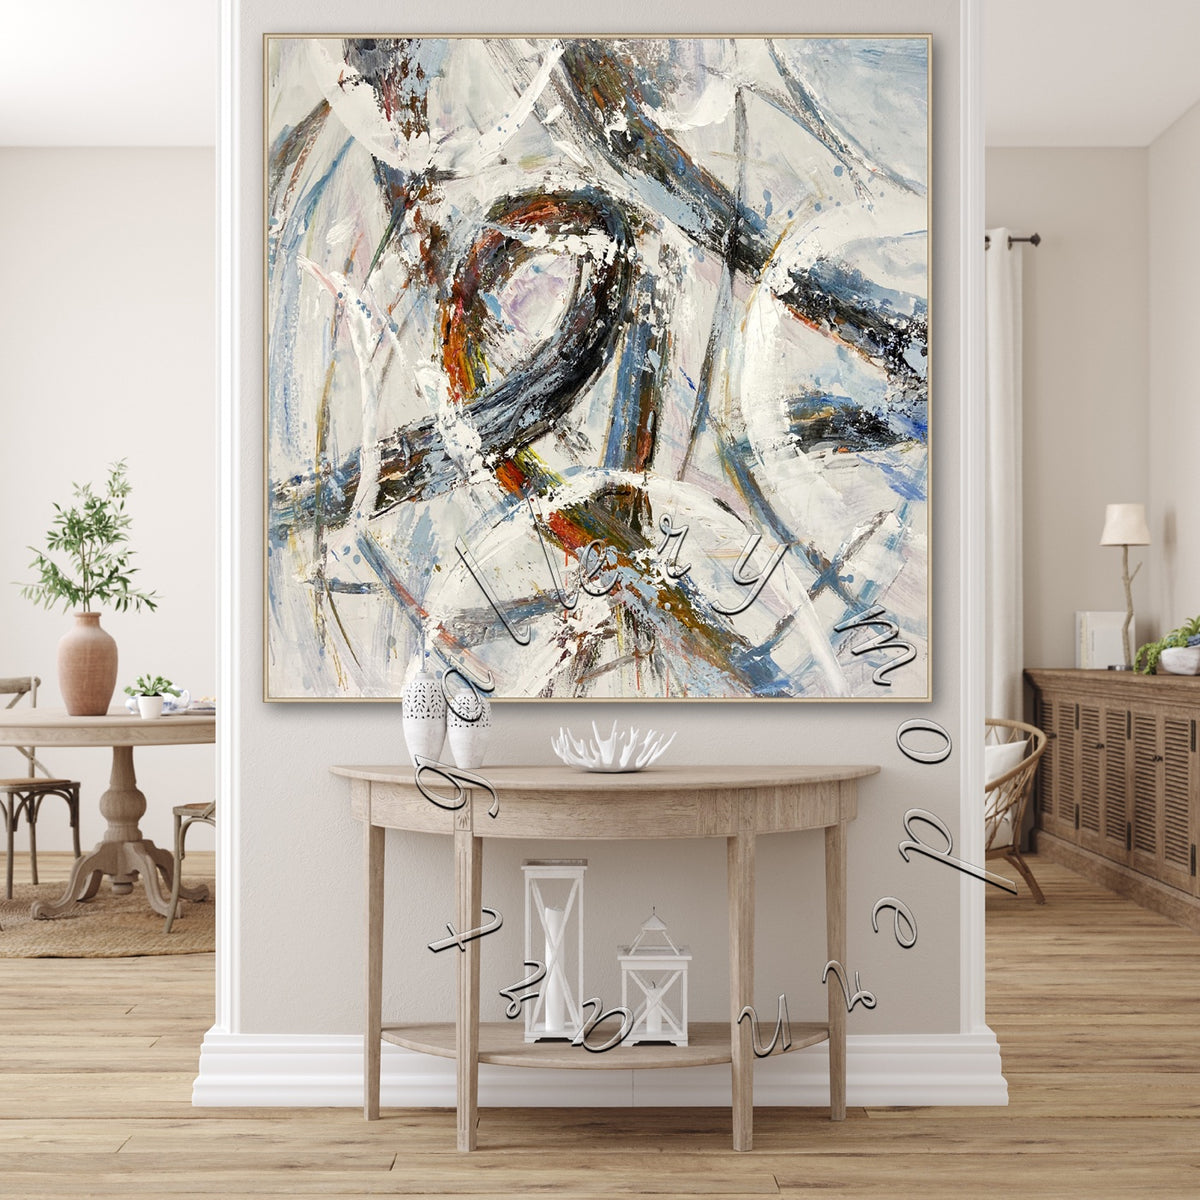 Large Abstract Canvas Painting, Texture Original Painting, Square Wall Art